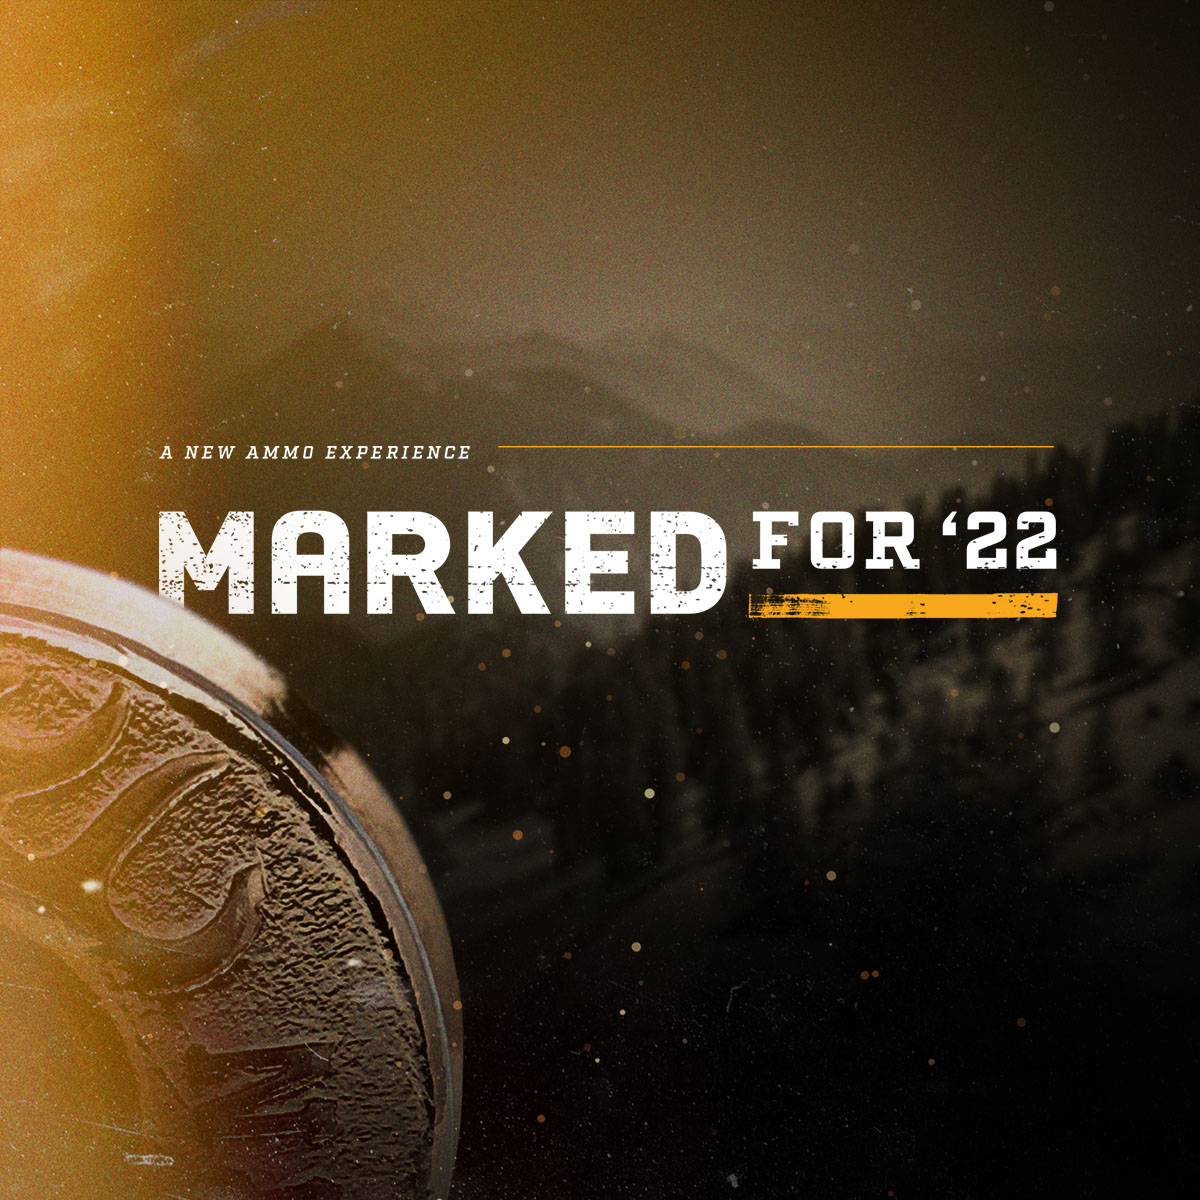 A New Ammo Experience: Marked for '22